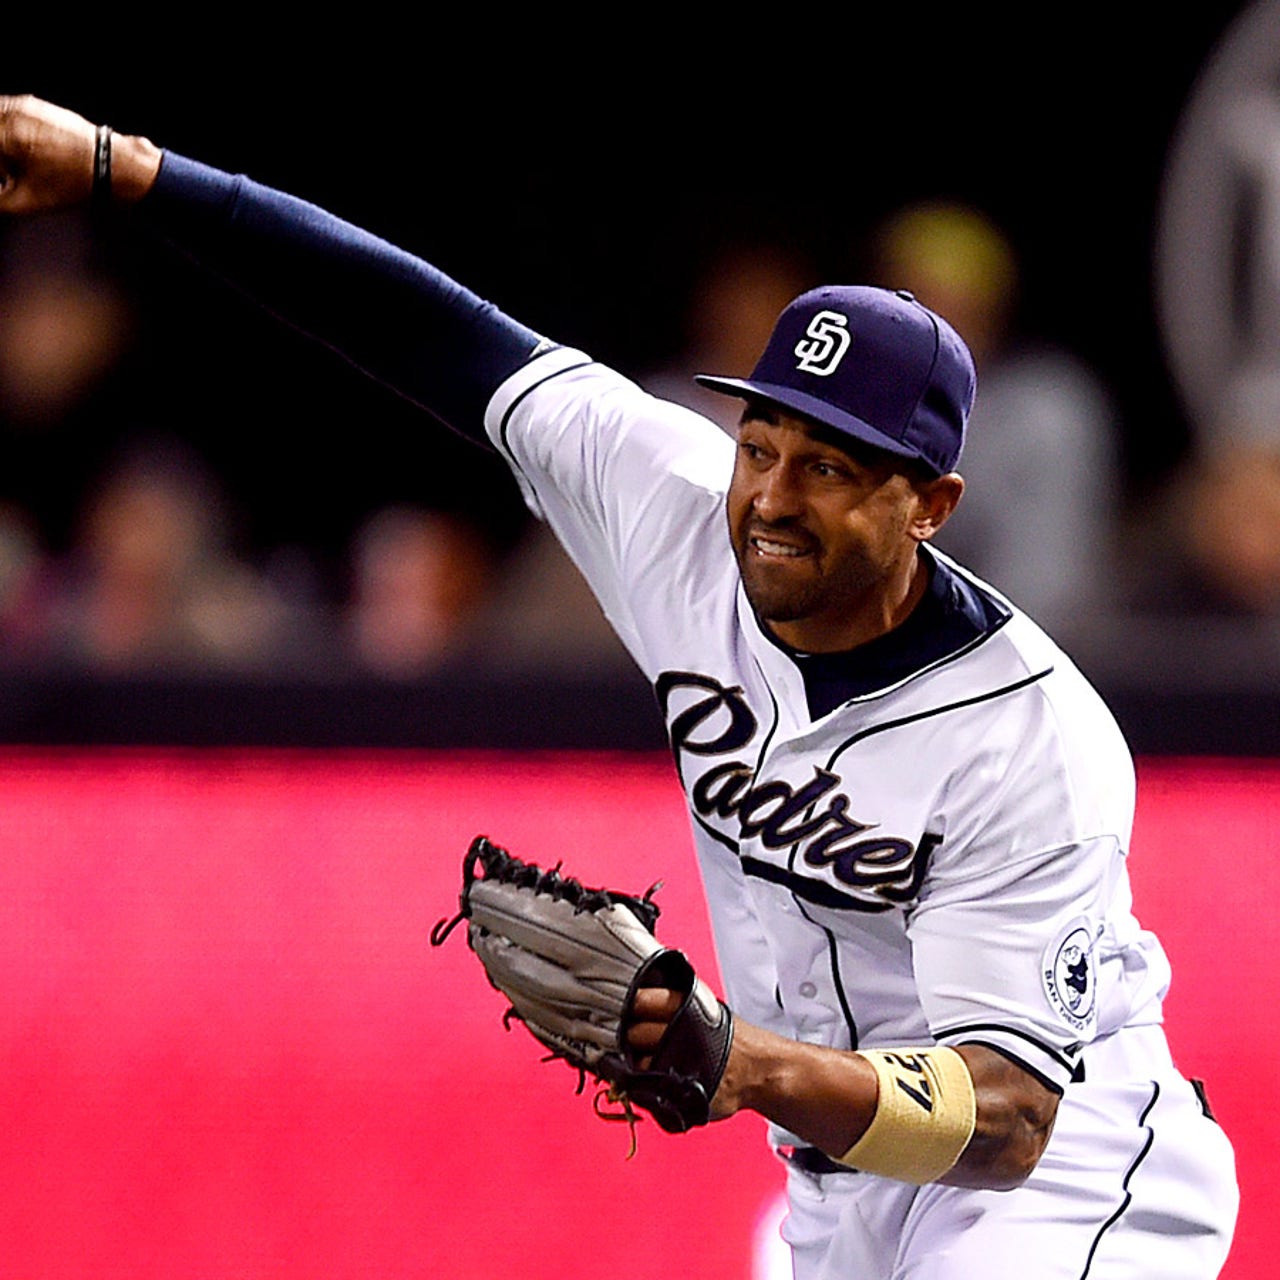 Matt Kemp throws 99-mph missile to plate to prevent runner tagging